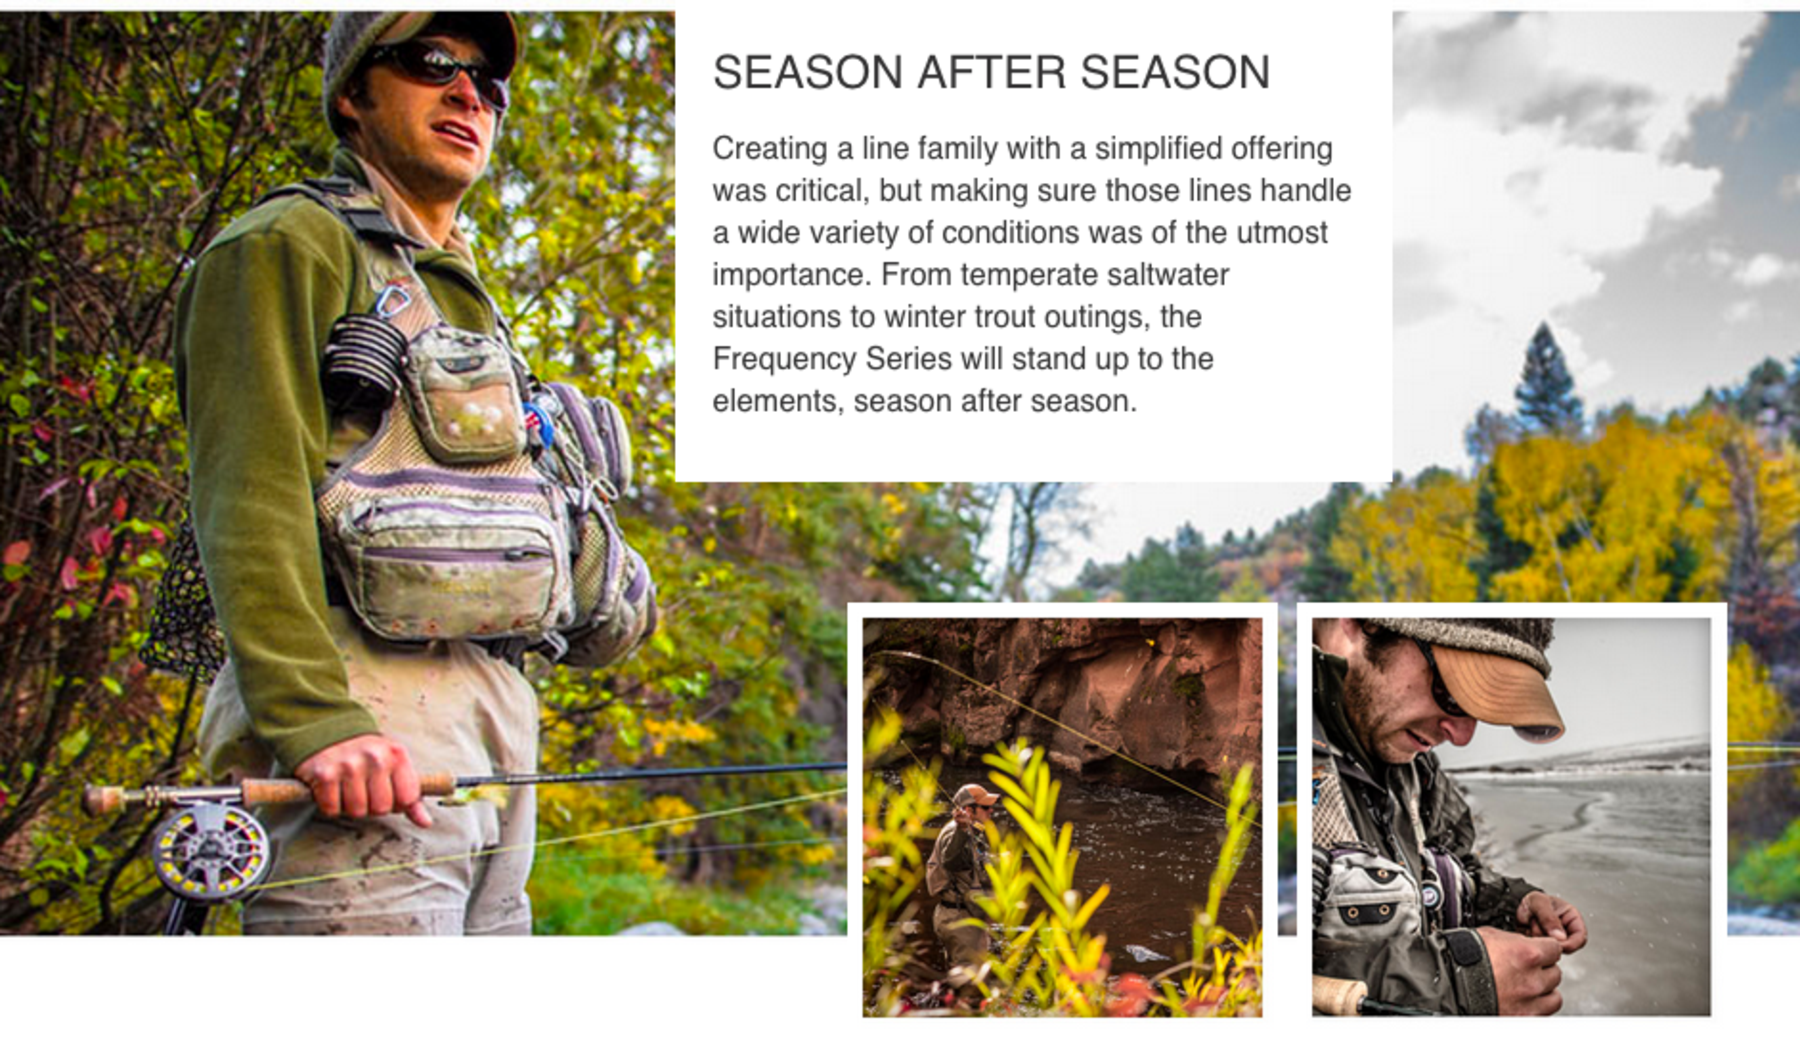 http://www.hatchmag.com/sites/default/files/styles/extra-large/public/field/image/sa-promo.png